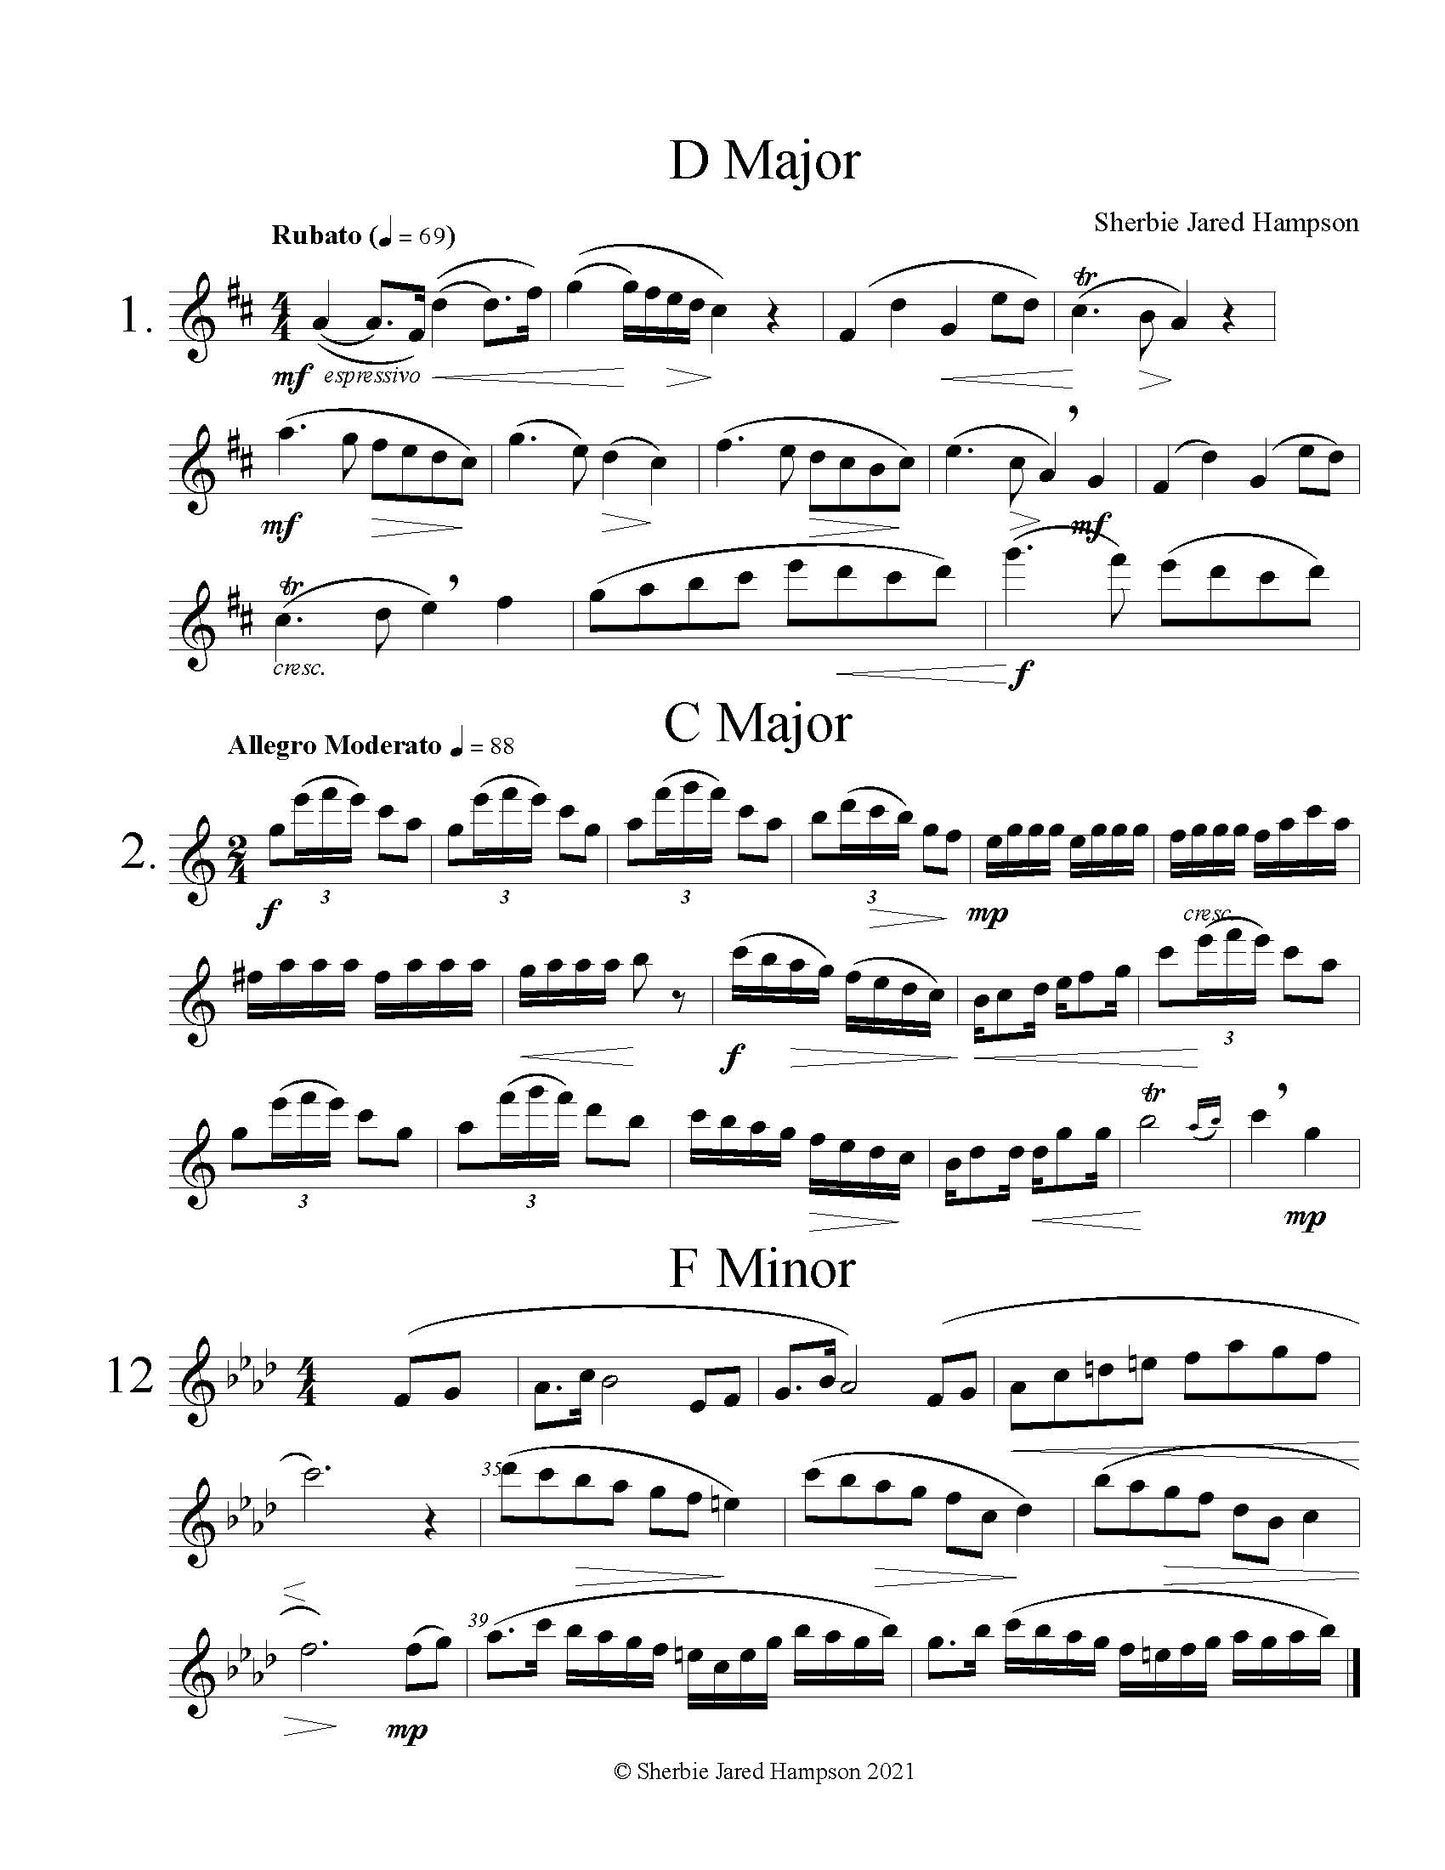 This page shows excerpts of three songs from Flutiful Etudes, Numbers 1, 2, and 12